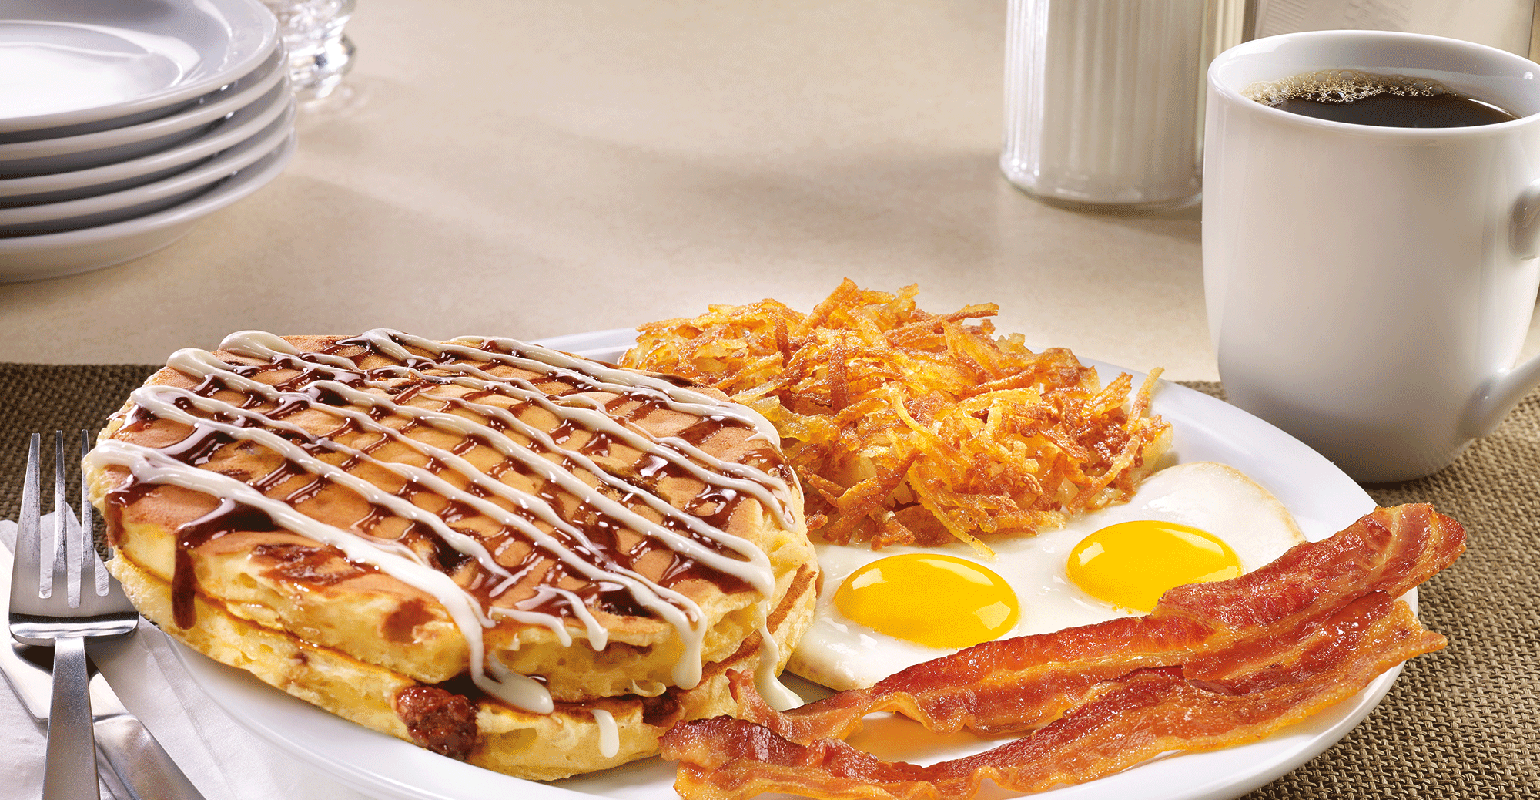 Denny’s new pancakes boost sales